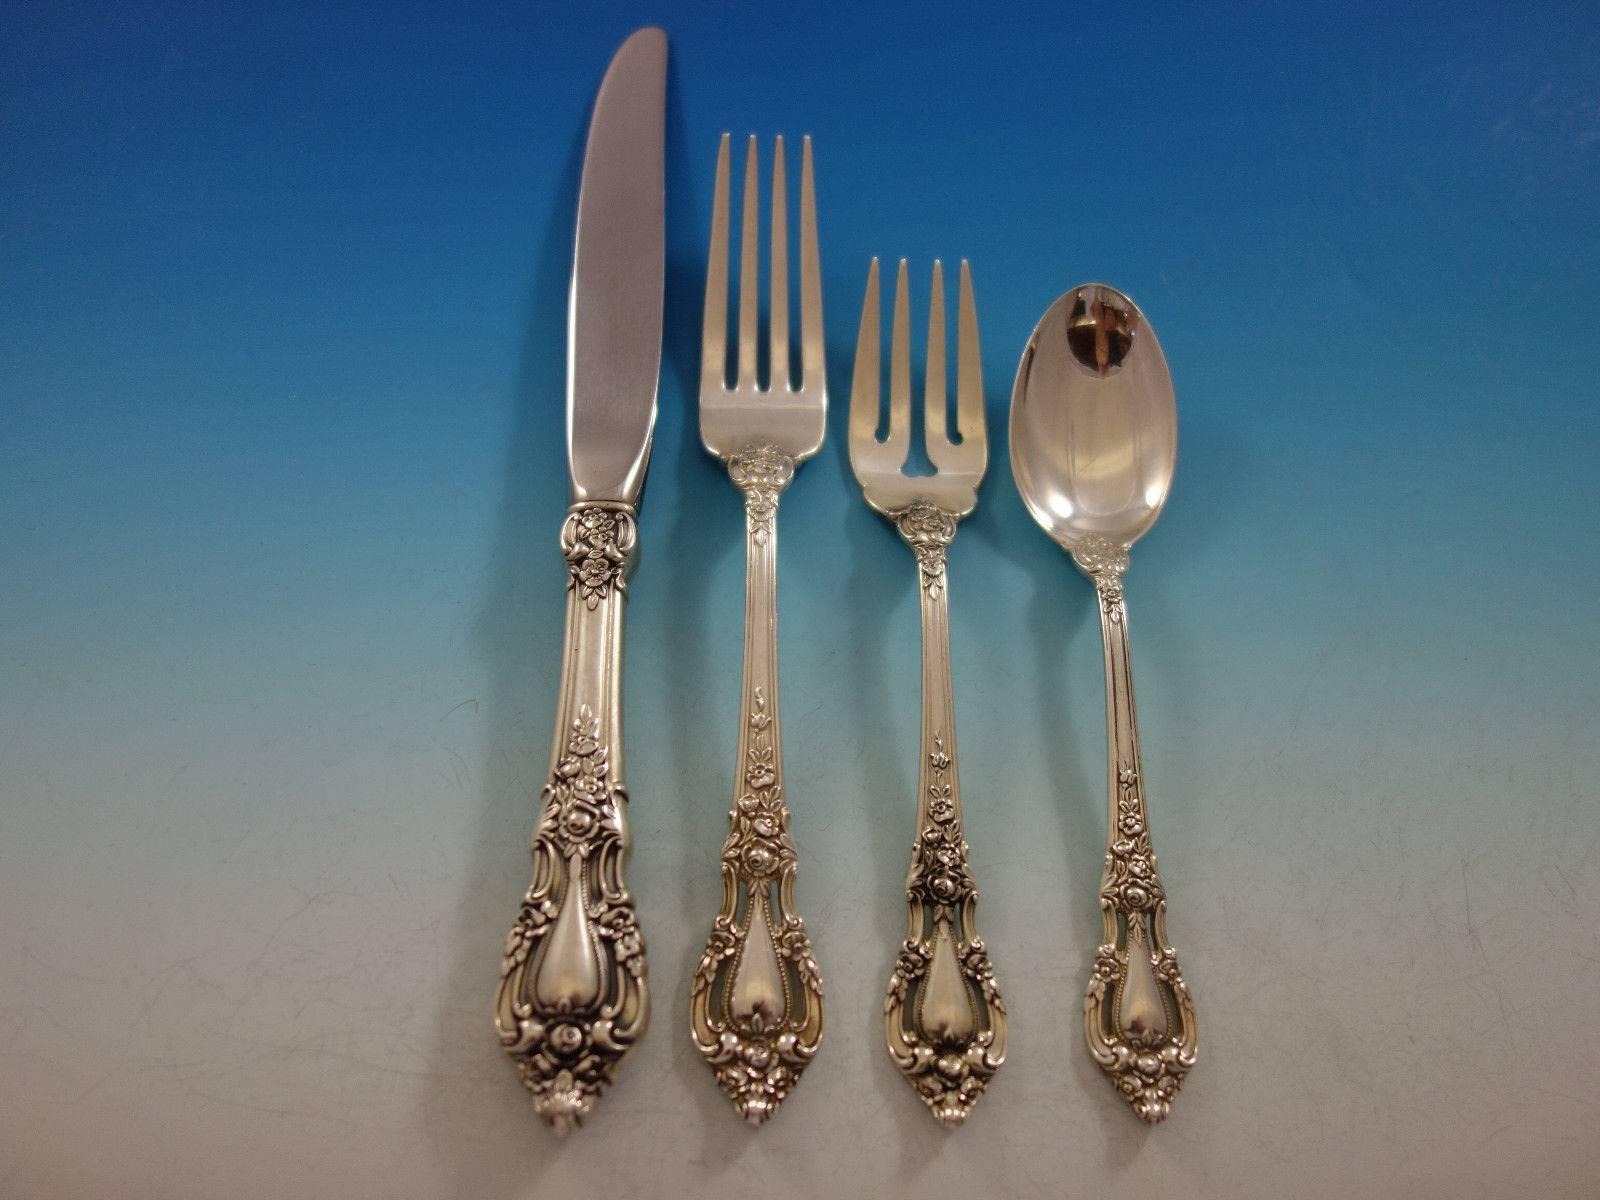 Eloquence by Lunt sterling silver flatware set, 34 pieces.
This set includes: Eight knives, 9 1/8